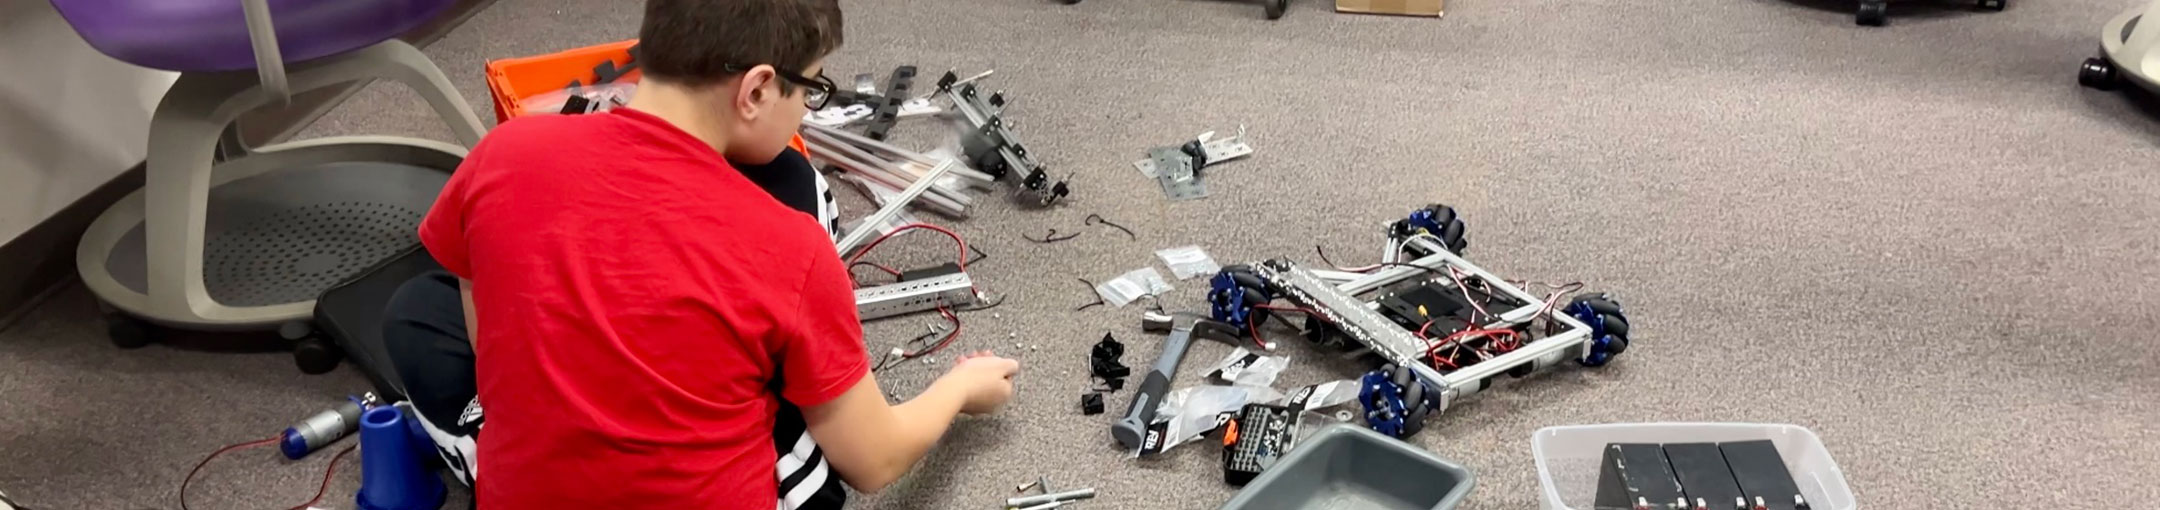 a younger student working on a small robotic vehicle